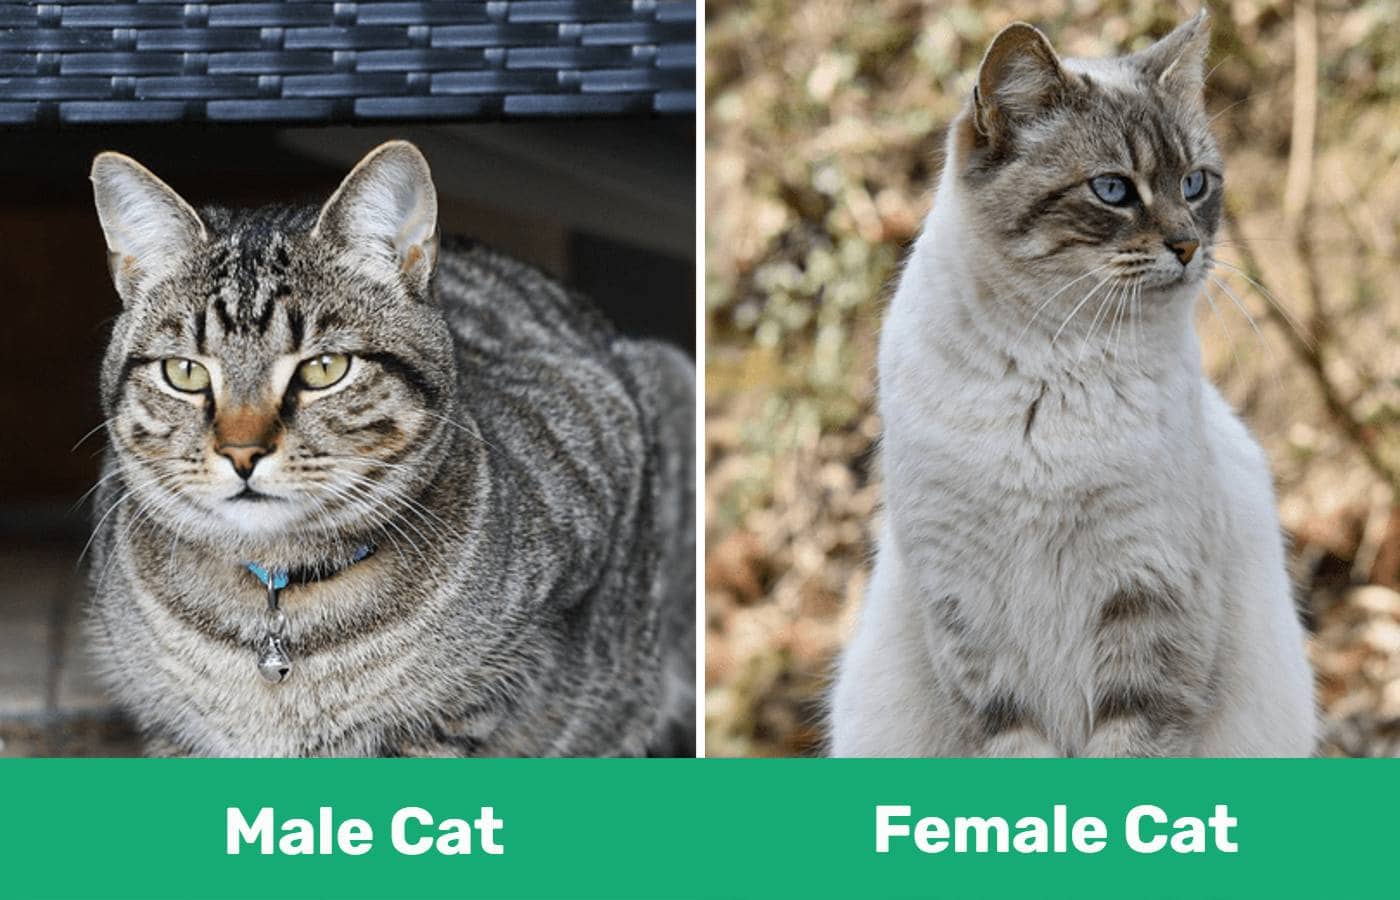 Can a female cat be an alpha?